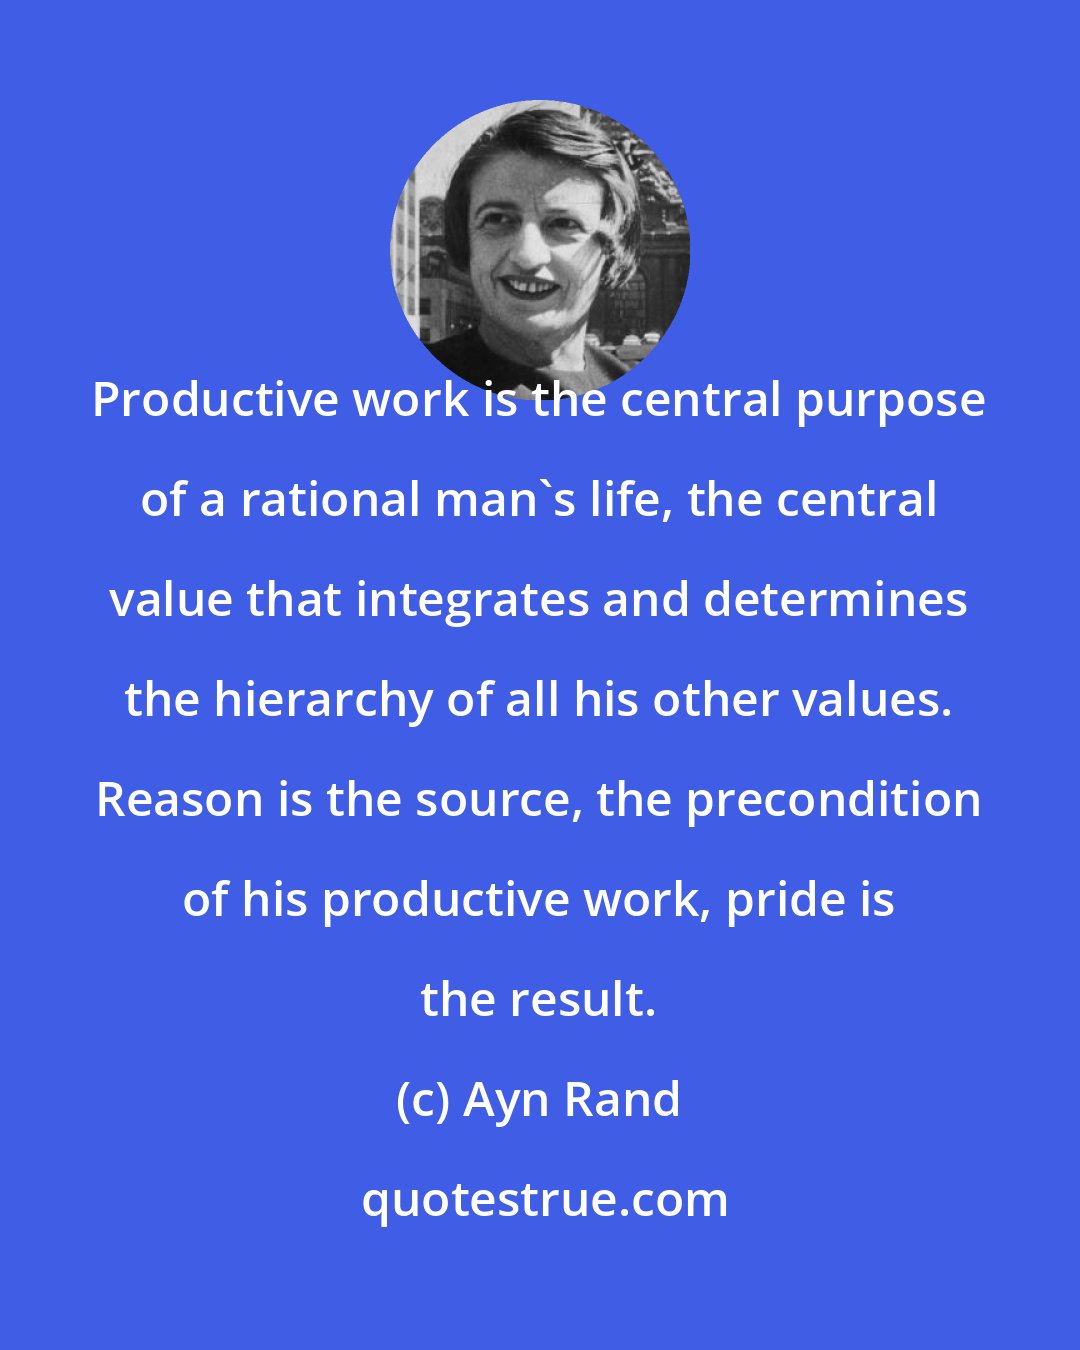 Ayn Rand: Productive work is the central purpose of a rational man's life, the central value that integrates and determines the hierarchy of all his other values. Reason is the source, the precondition of his productive work, pride is the result.